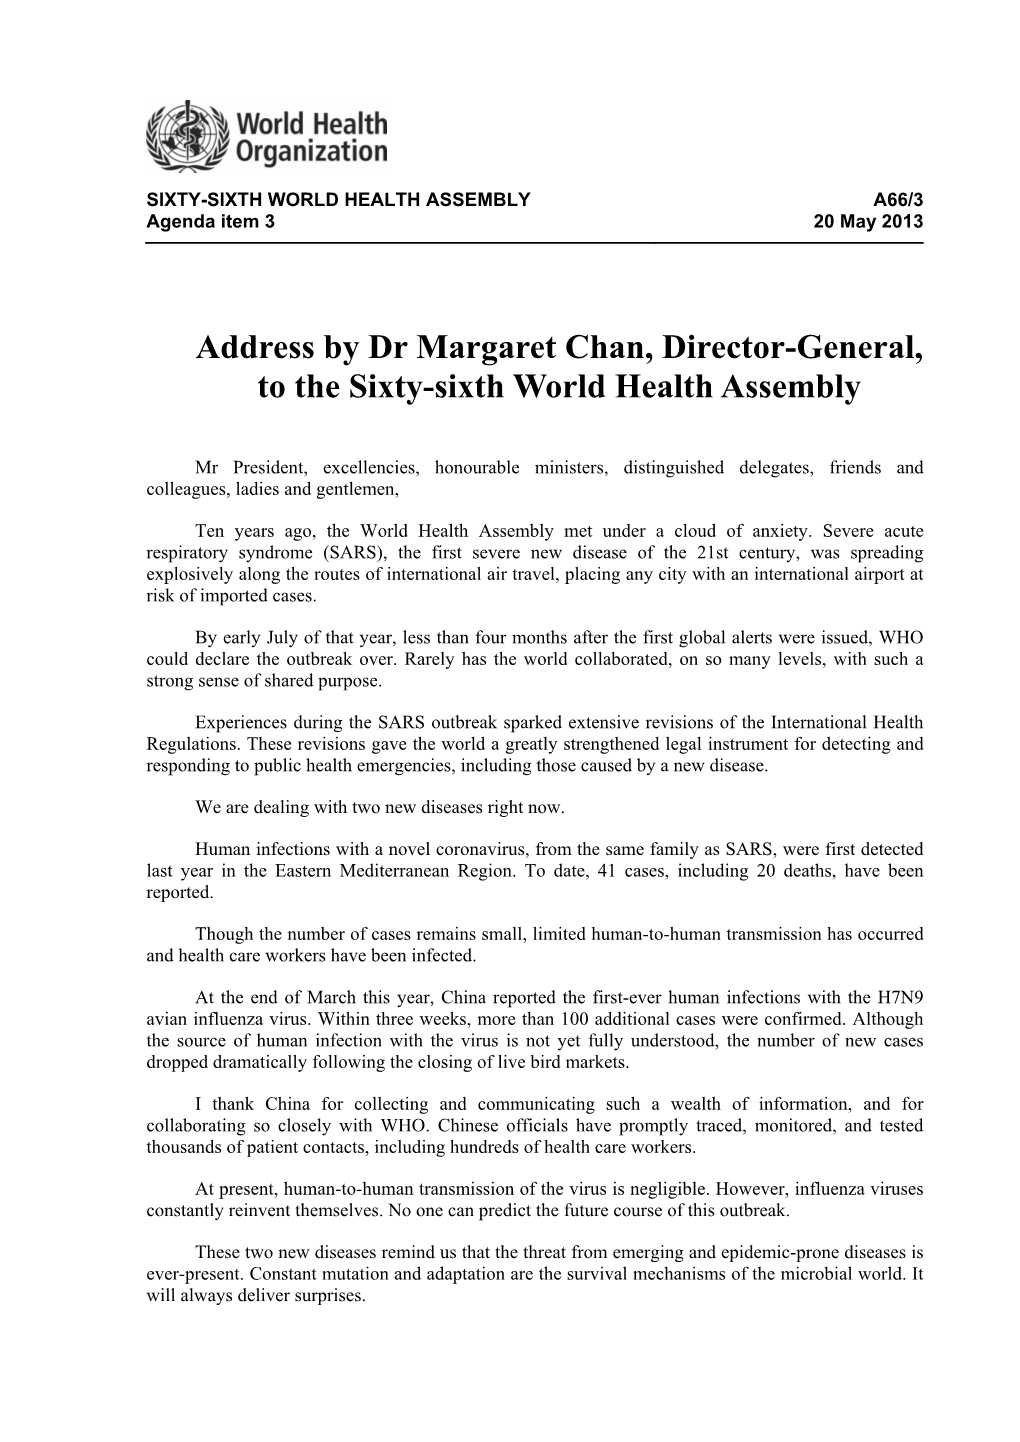 Address by Dr Margaret Chan, Director-General, to the Sixty-Sixth World Health Assembly